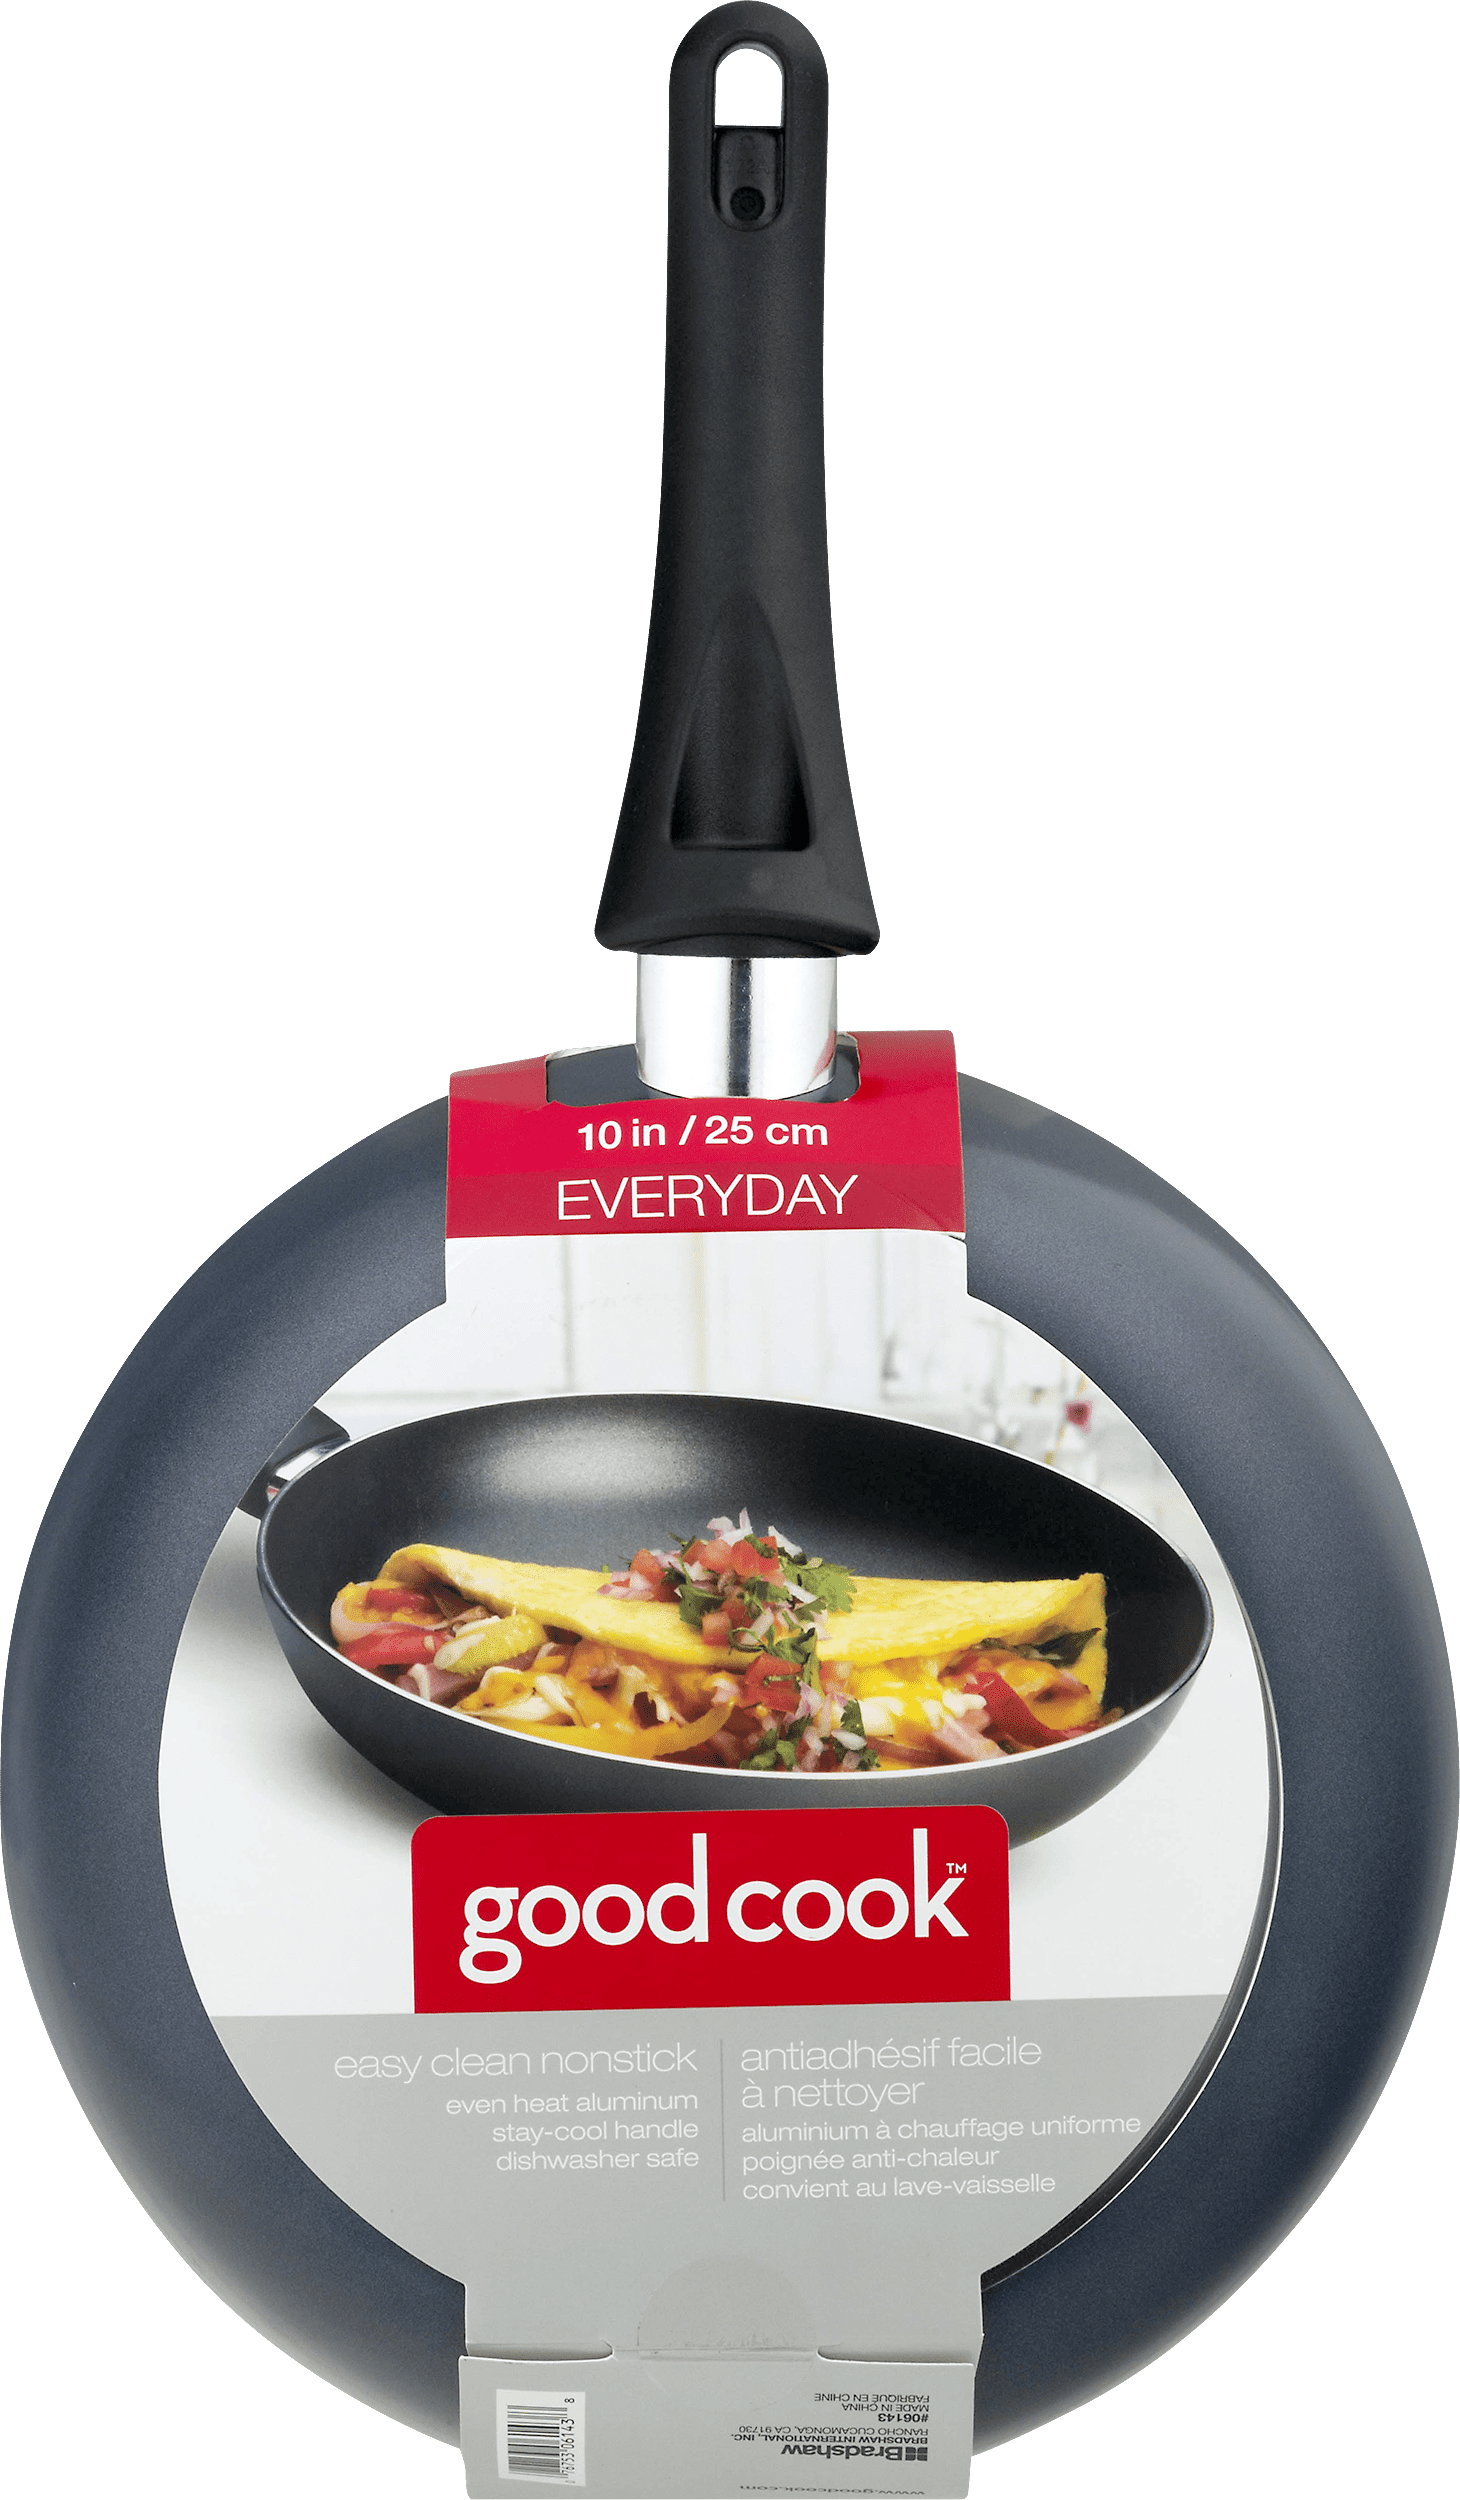 5 Of The Best Divided Pans For Quick Cooking And Cleaning